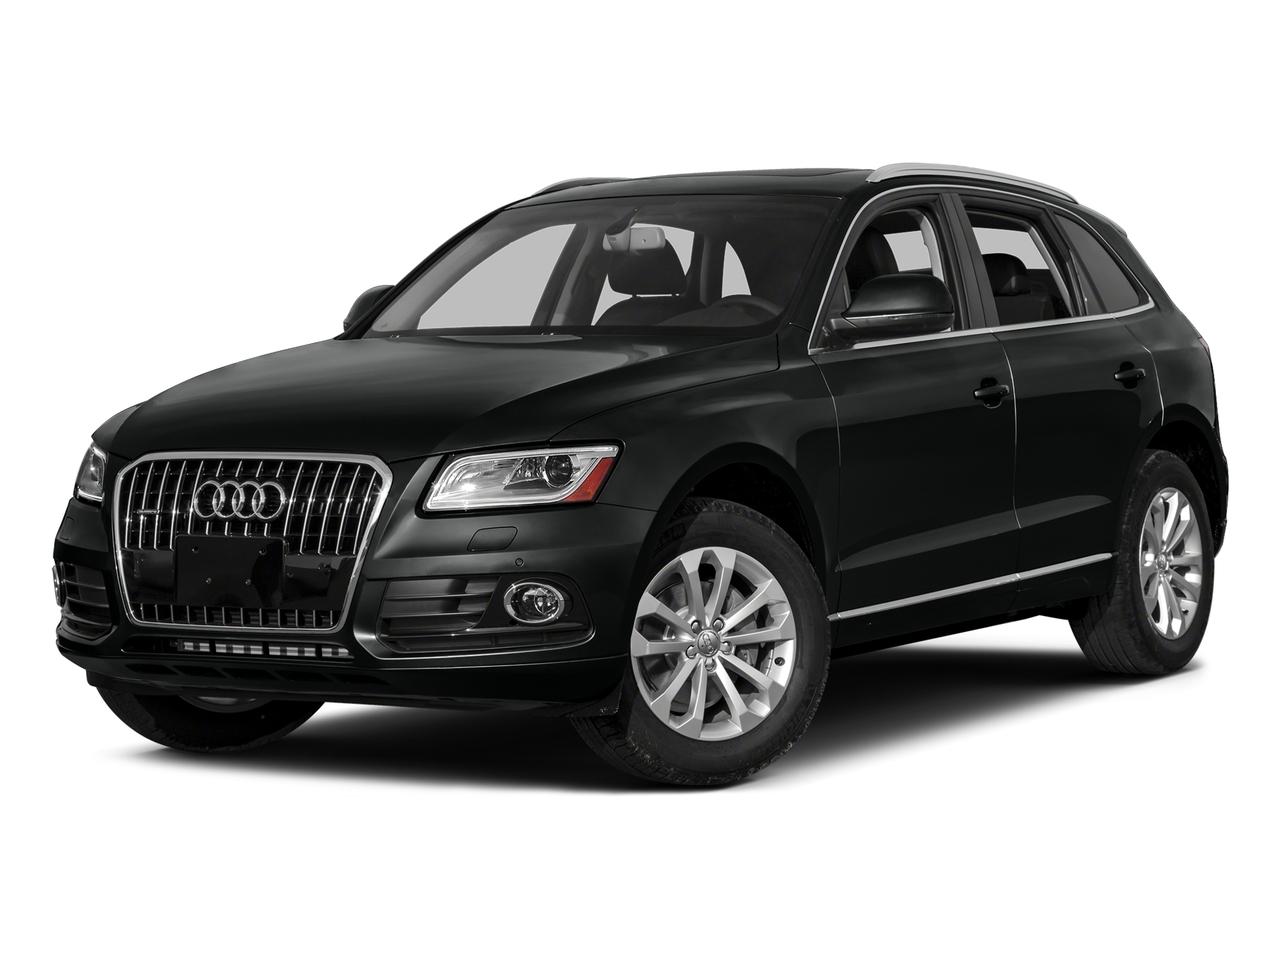 2016 Audi Q5 Vehicle Photo in Allentown, PA 18103